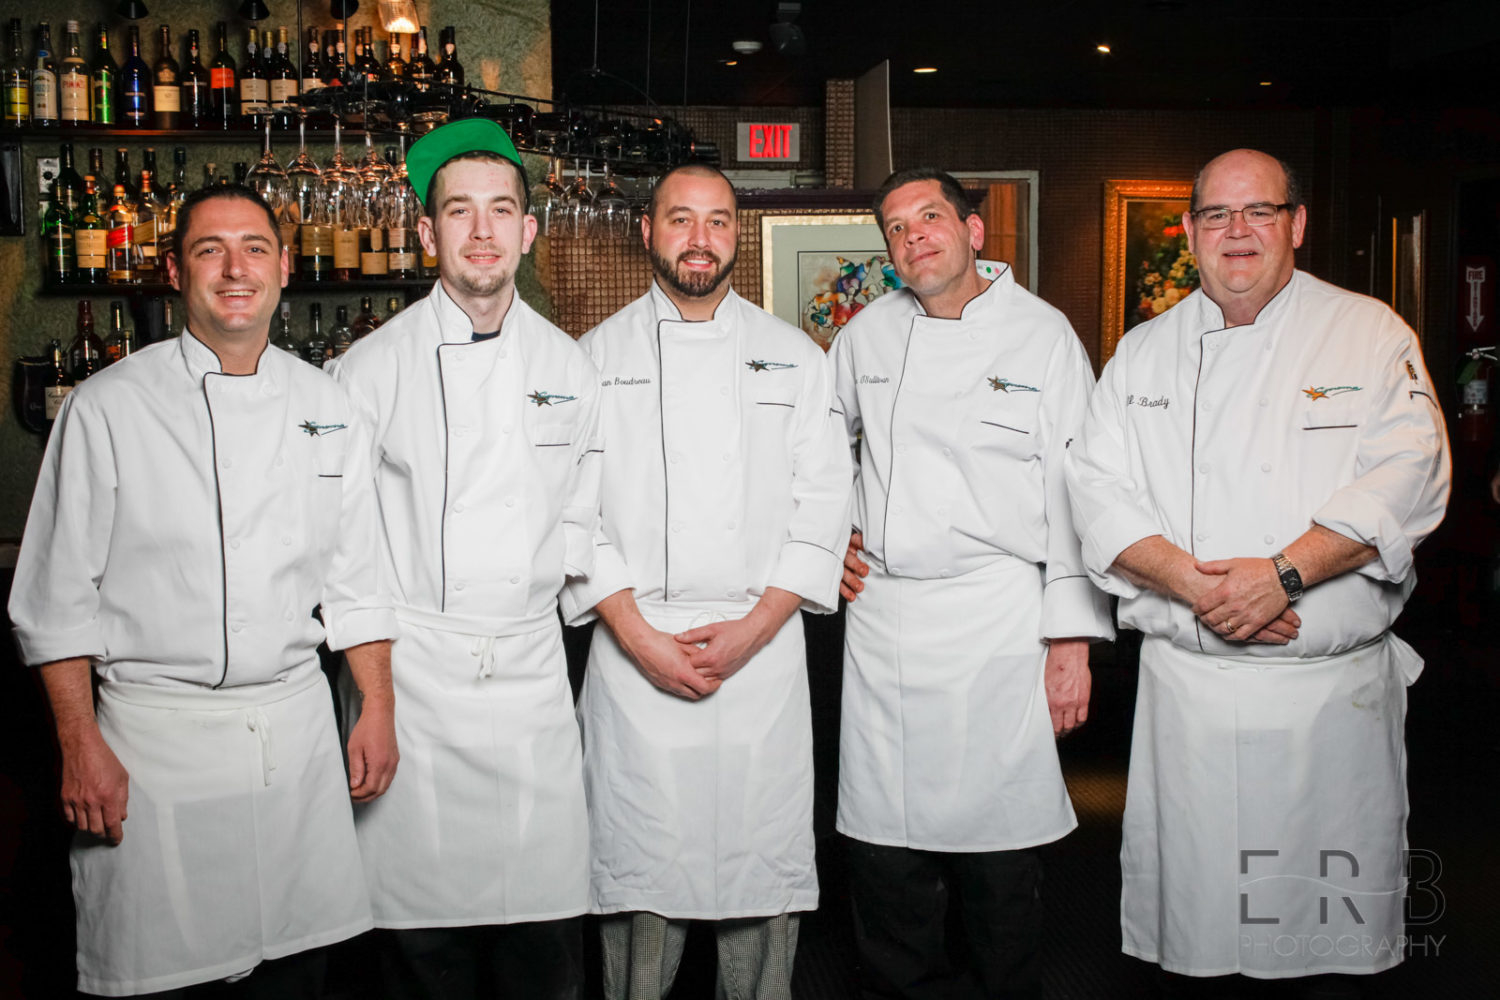 Chef Brady (far right) along with his culinary team at Sonoma (Taken by Erb Photography for Mass Foodies).